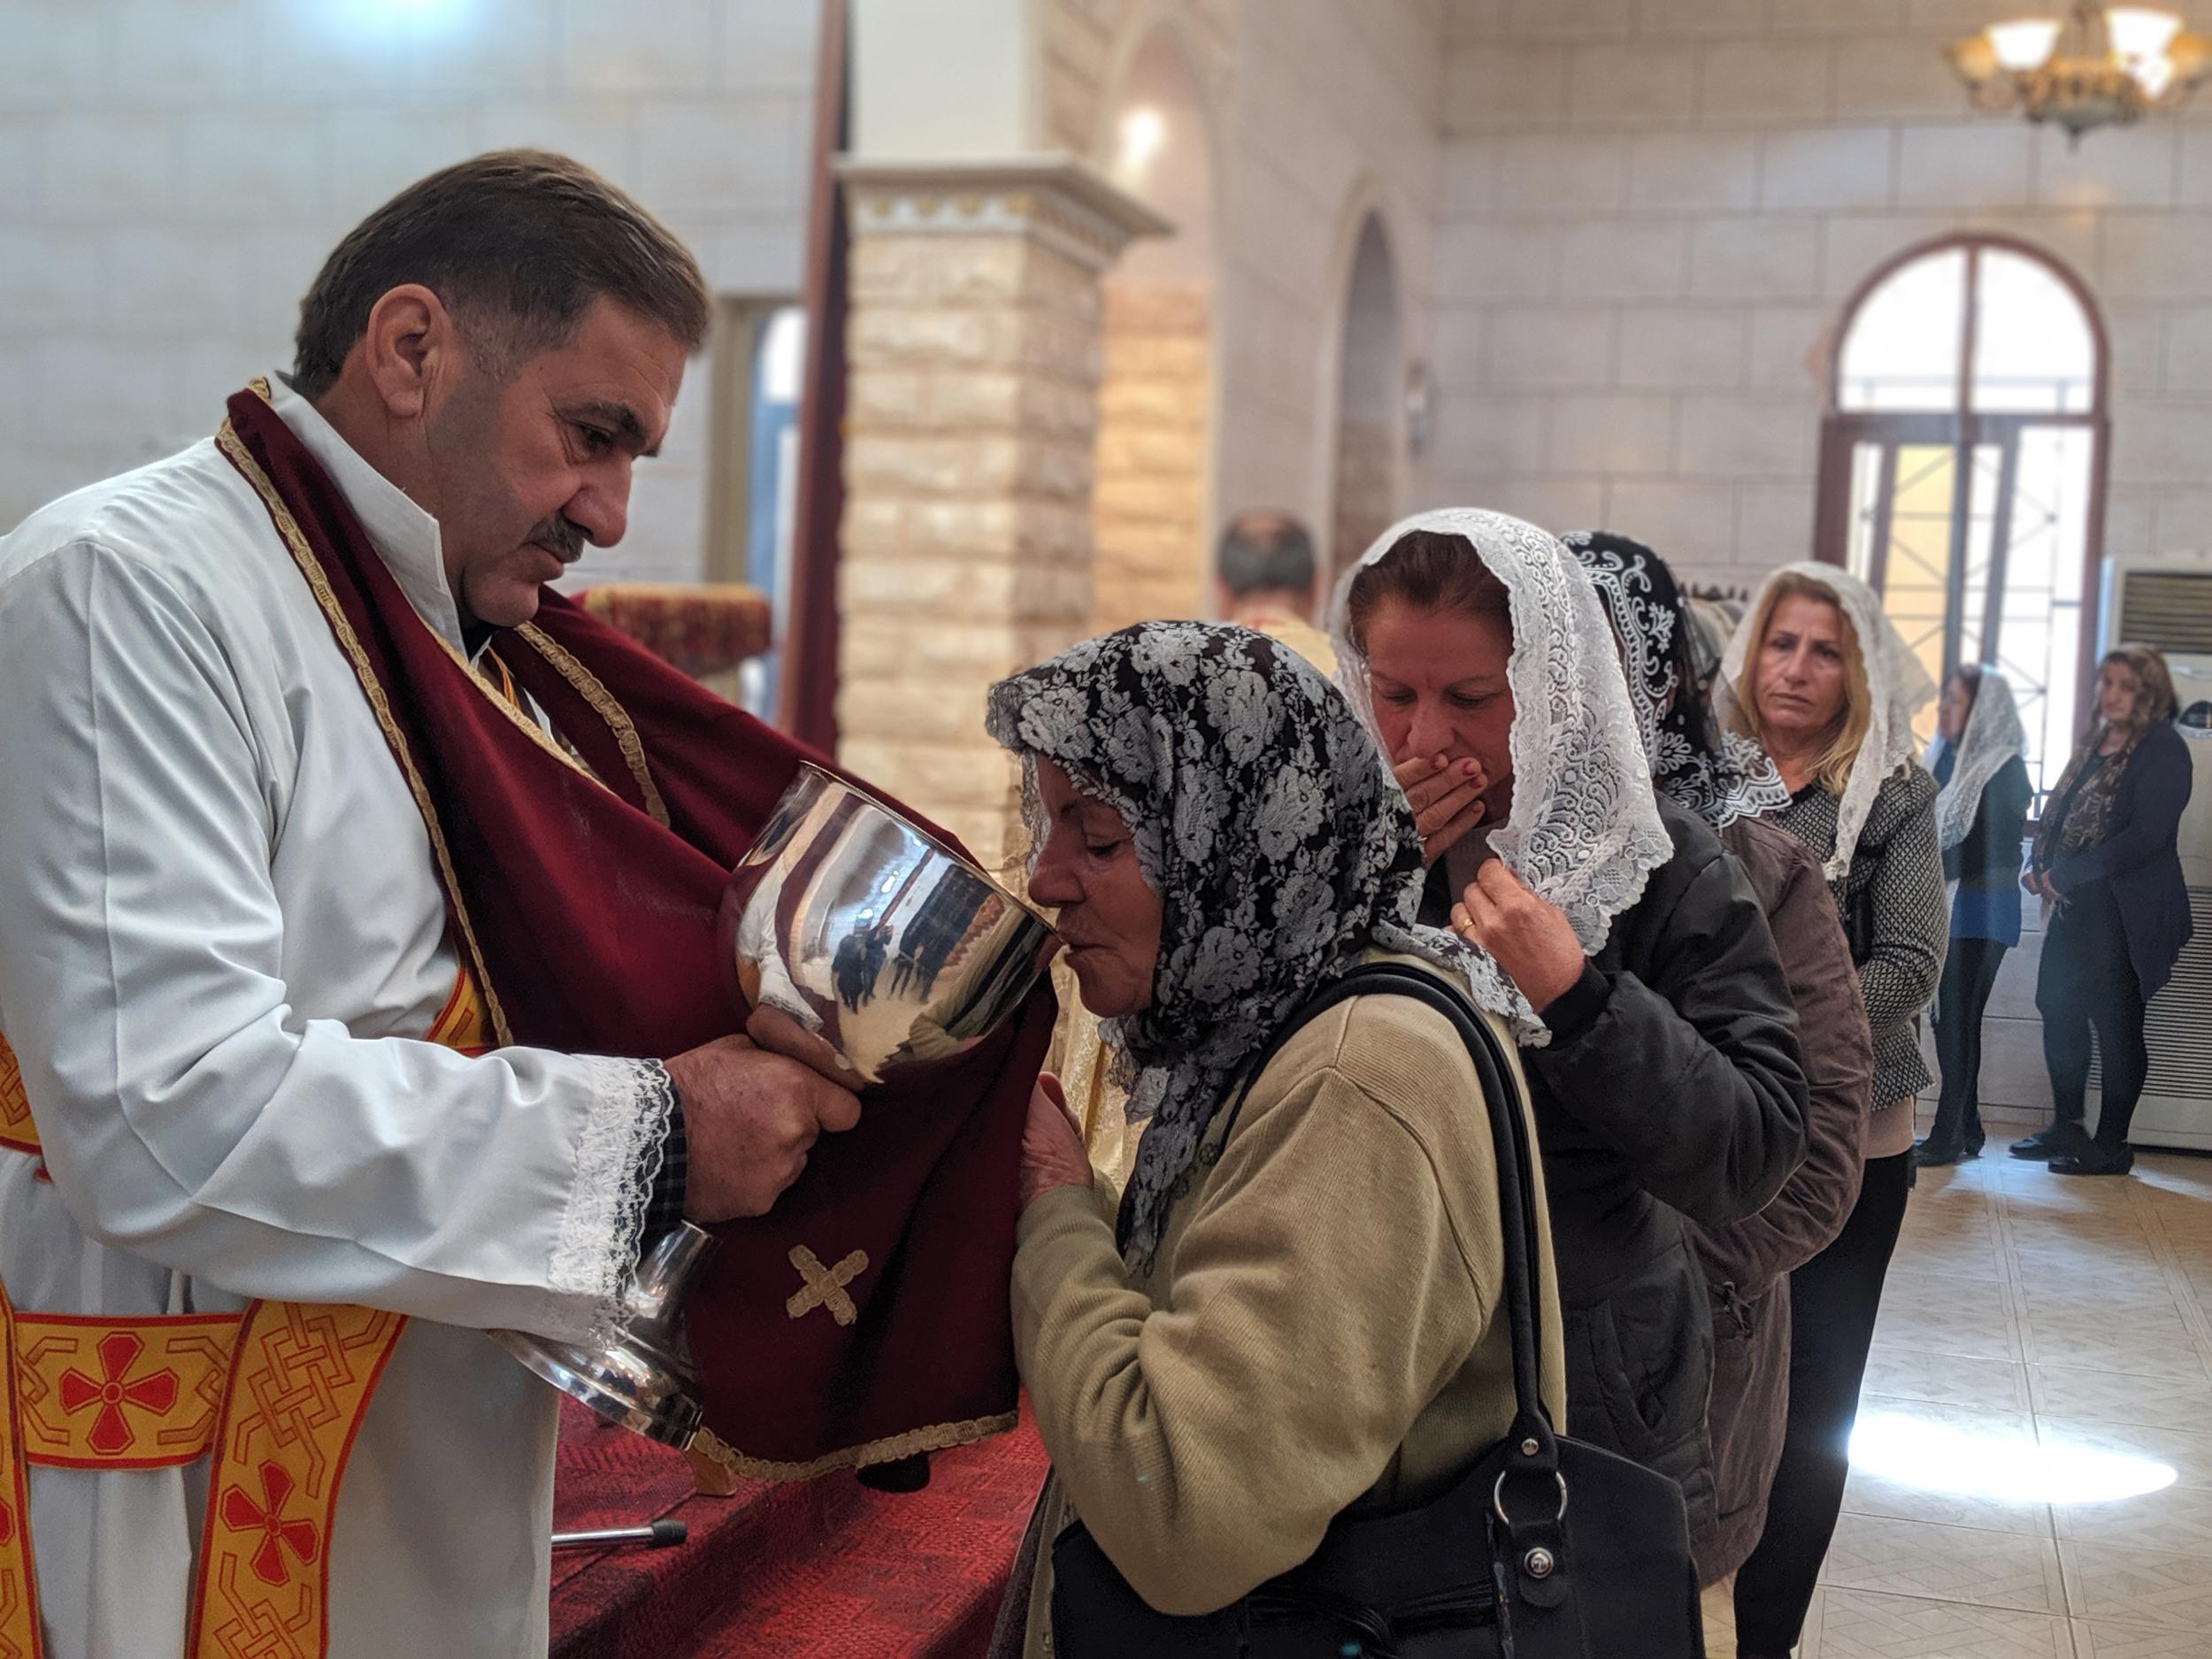 A woman takes communion at a church in Tal Tamr (Richard Hall/The Independent)